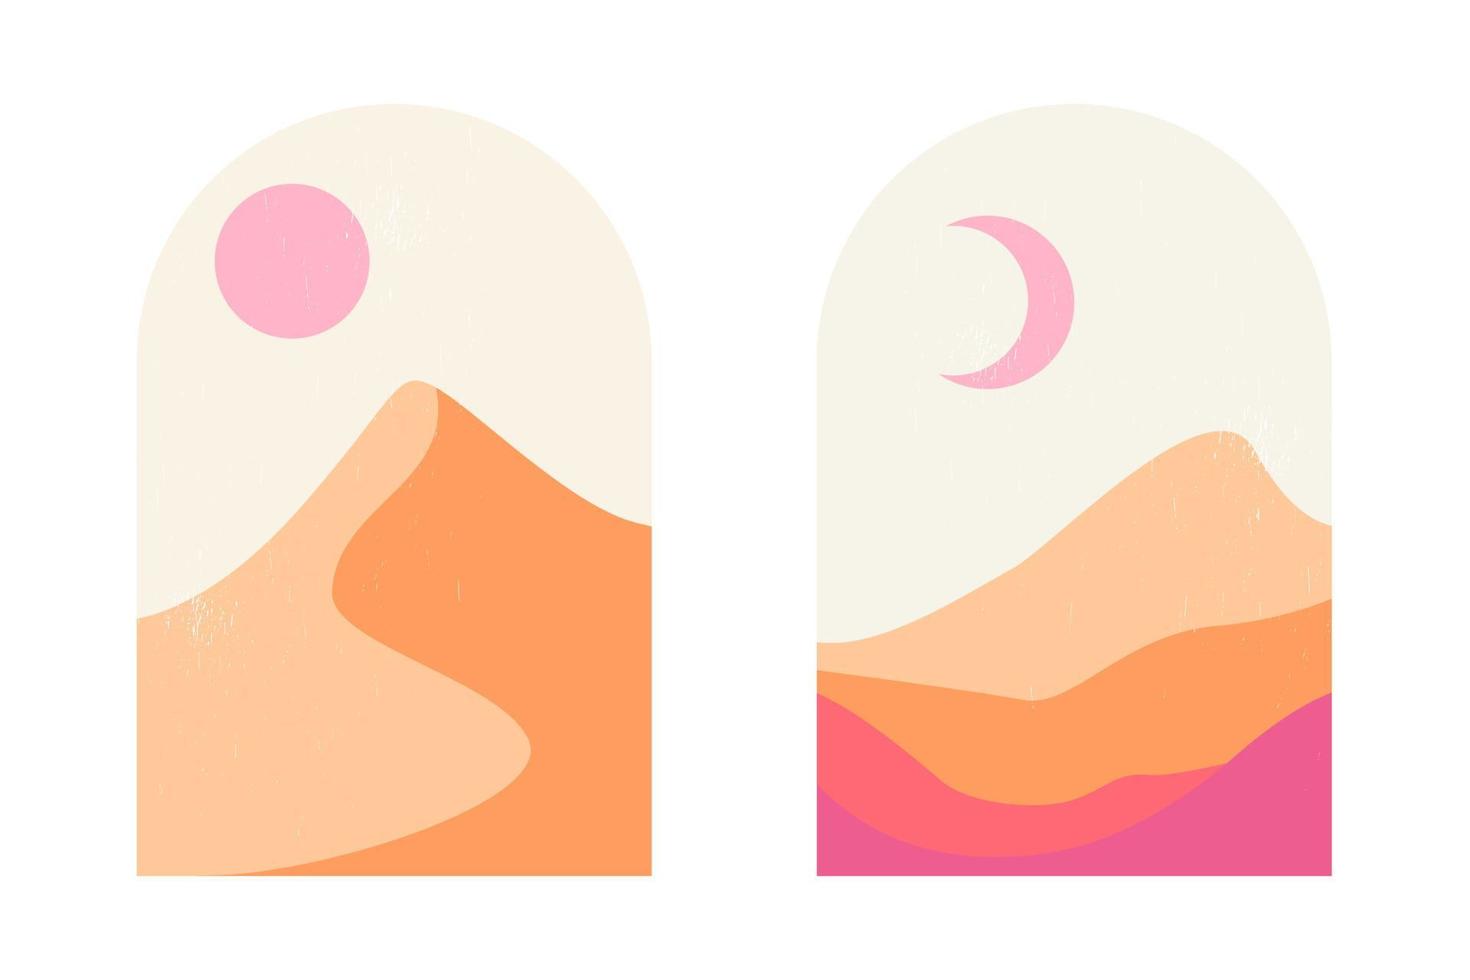 Set of abstract mountain and desert landscapes in arches in an aesthetic, minimalist mid-century style in soft pink and sand colors. Boho style landscape with sun, moon and sand dunes at sunset. vector